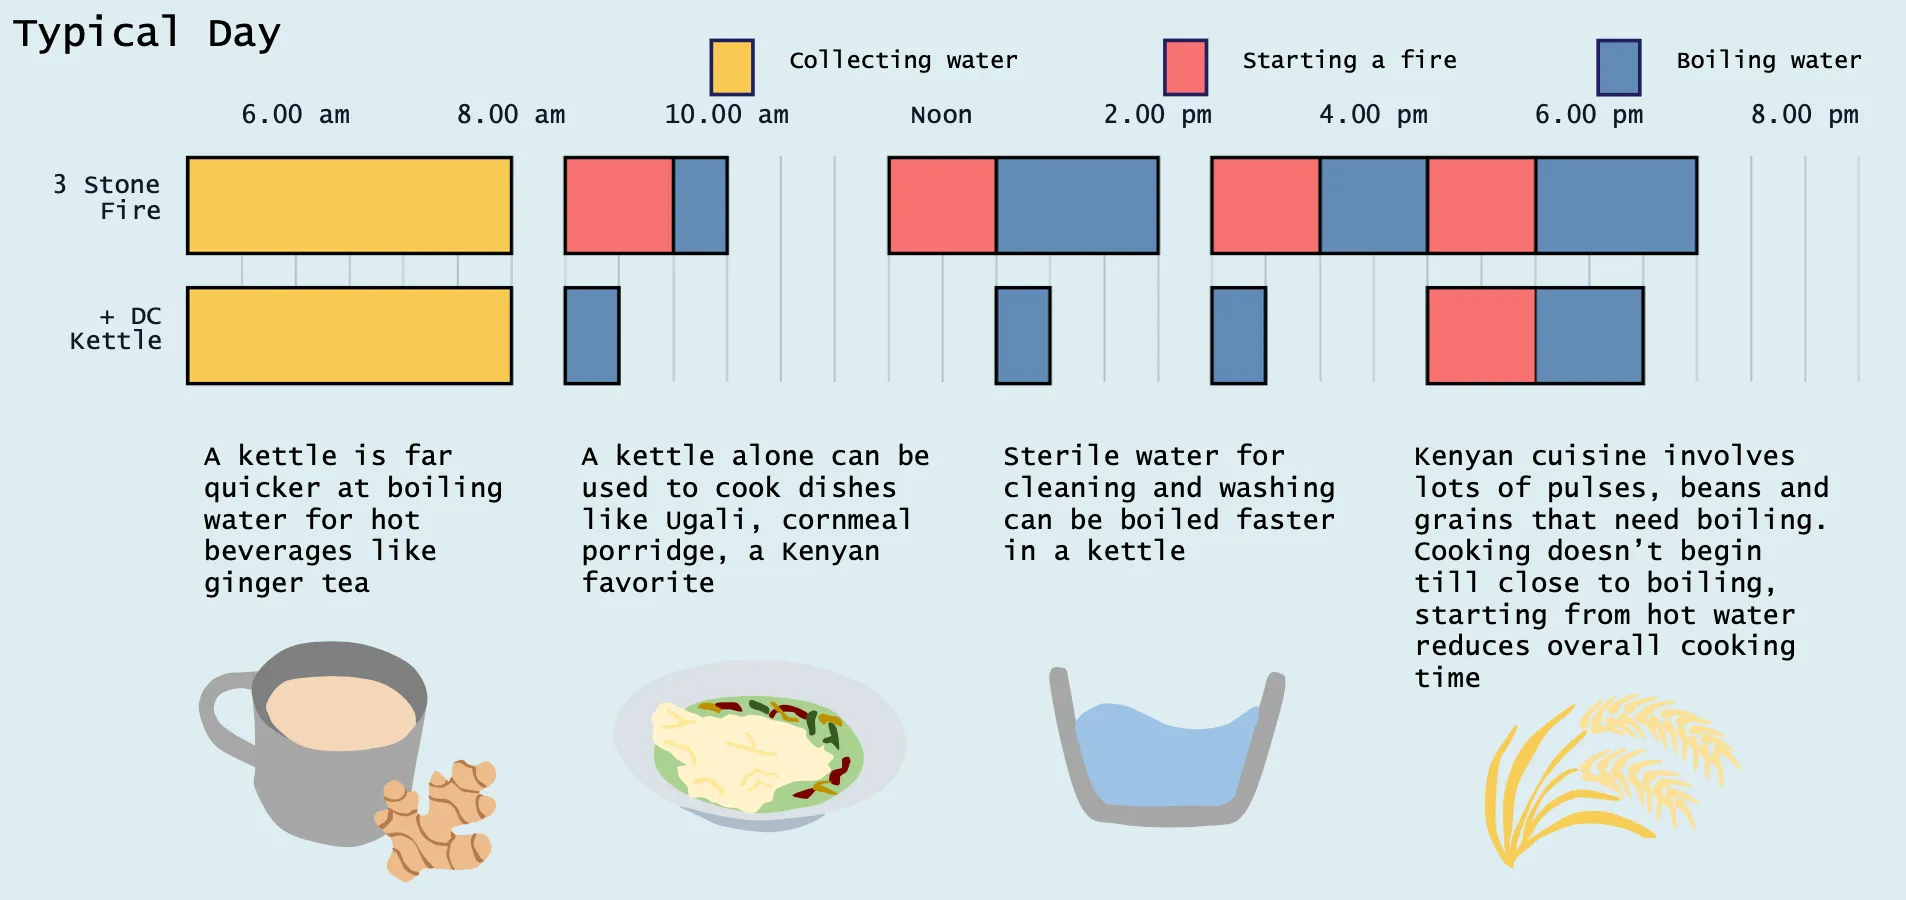 Infographic showing the potential time saving of a kettle